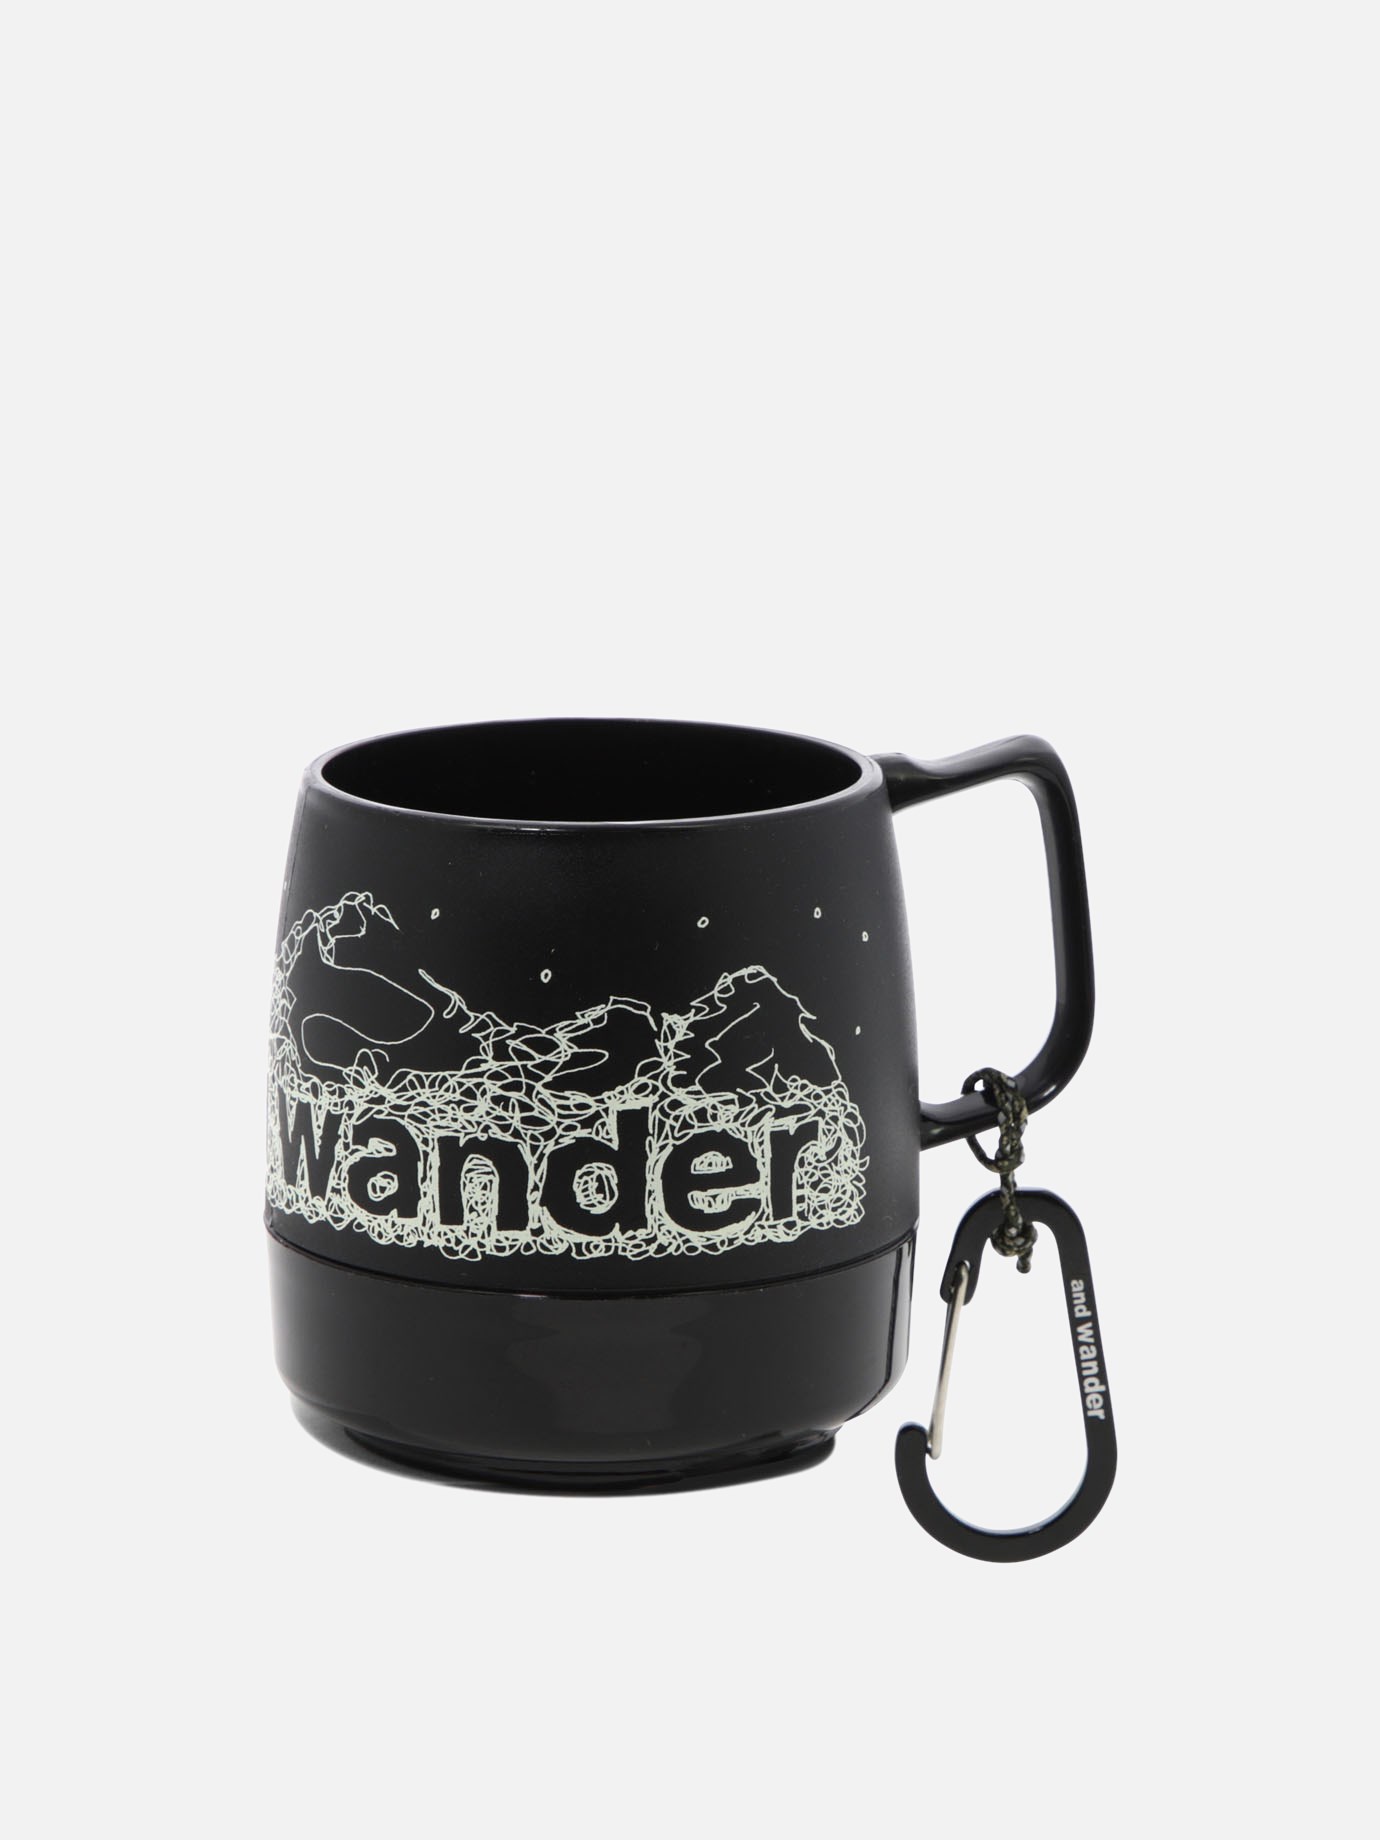  Dinex  mugby and Wander - 4